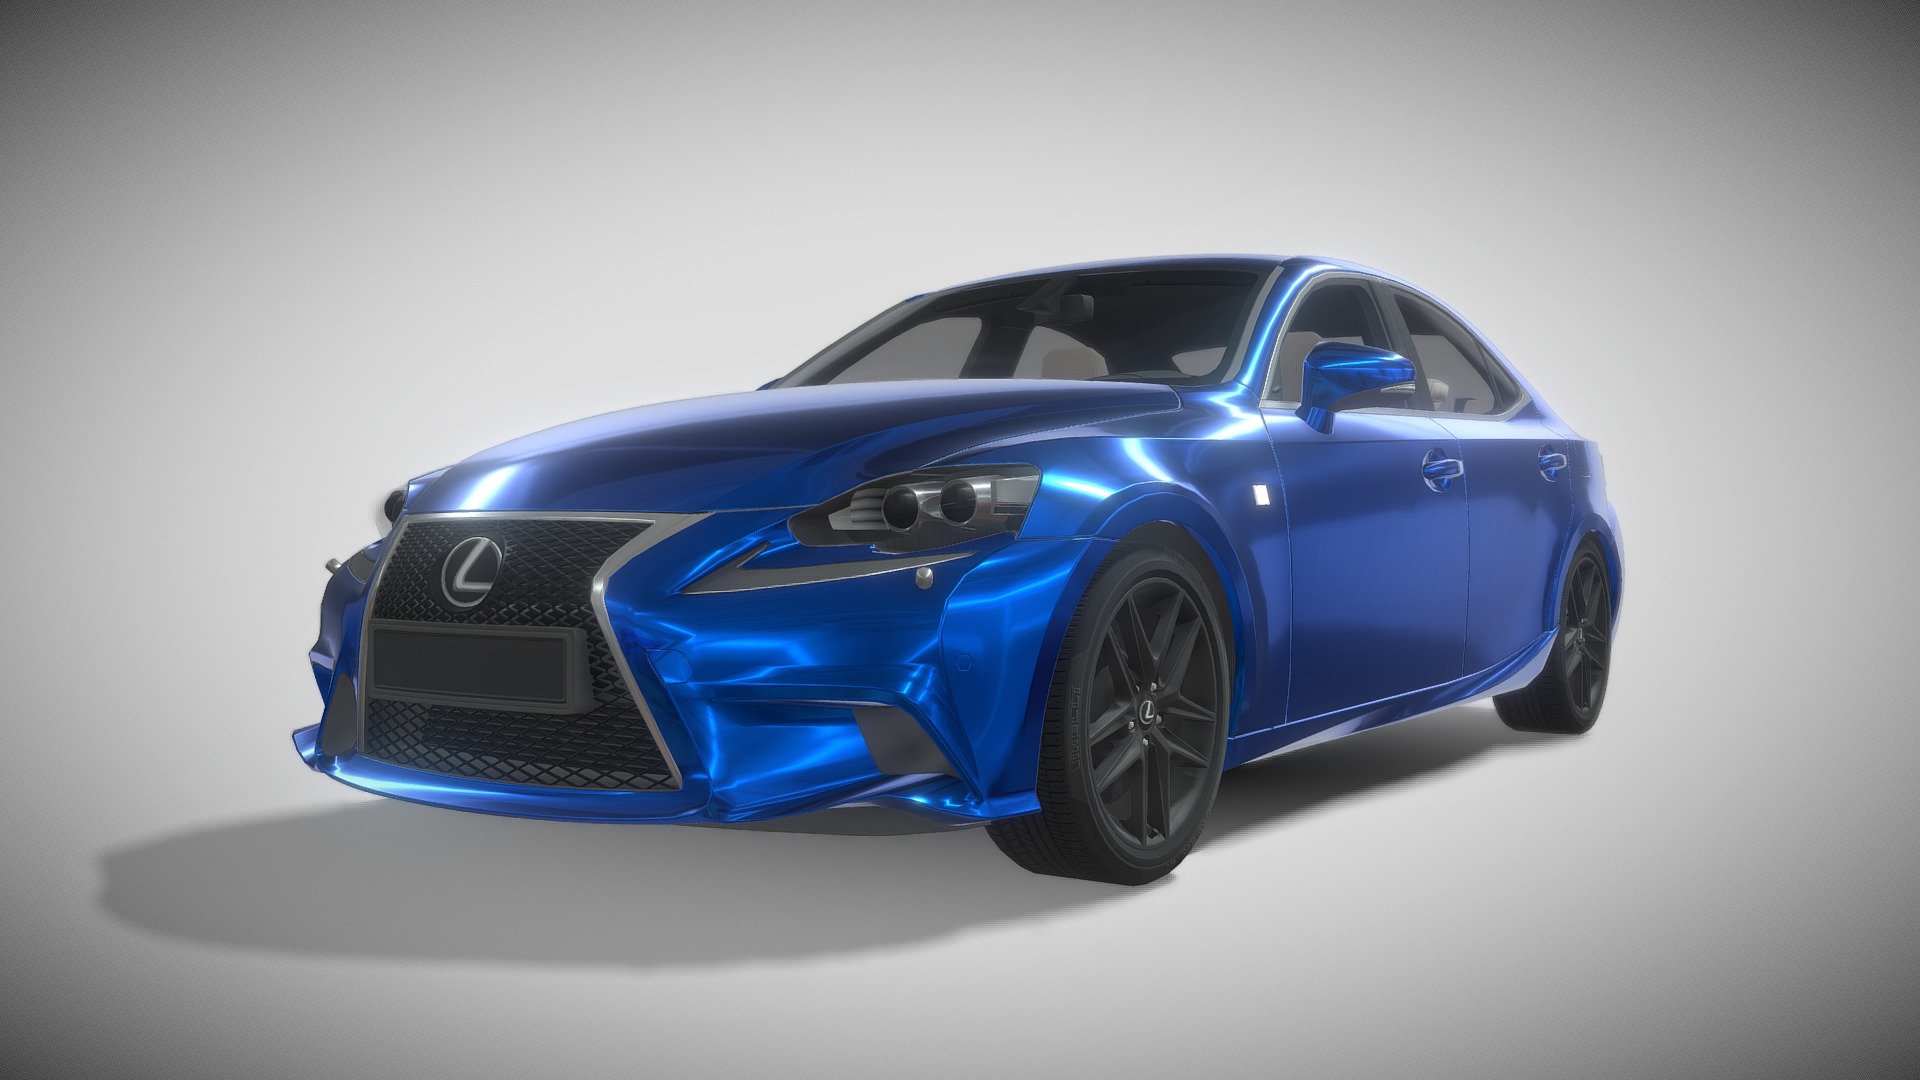 Lexus Luxurycar Sport Model,highpoly &amp; HQ Interior mesh.
Software: 3DMax.
This model has a realistic interior (with a seperate steering-wheel), seperate wheels (hinged at geometry centre), seperated calipers and high-res textures. Overall, it’s a great model for use on mobile applications/games and in XR (AR/VR) environments.
 - Lexus Luxurycar Sport Model - 3D model by sanfree 3d model